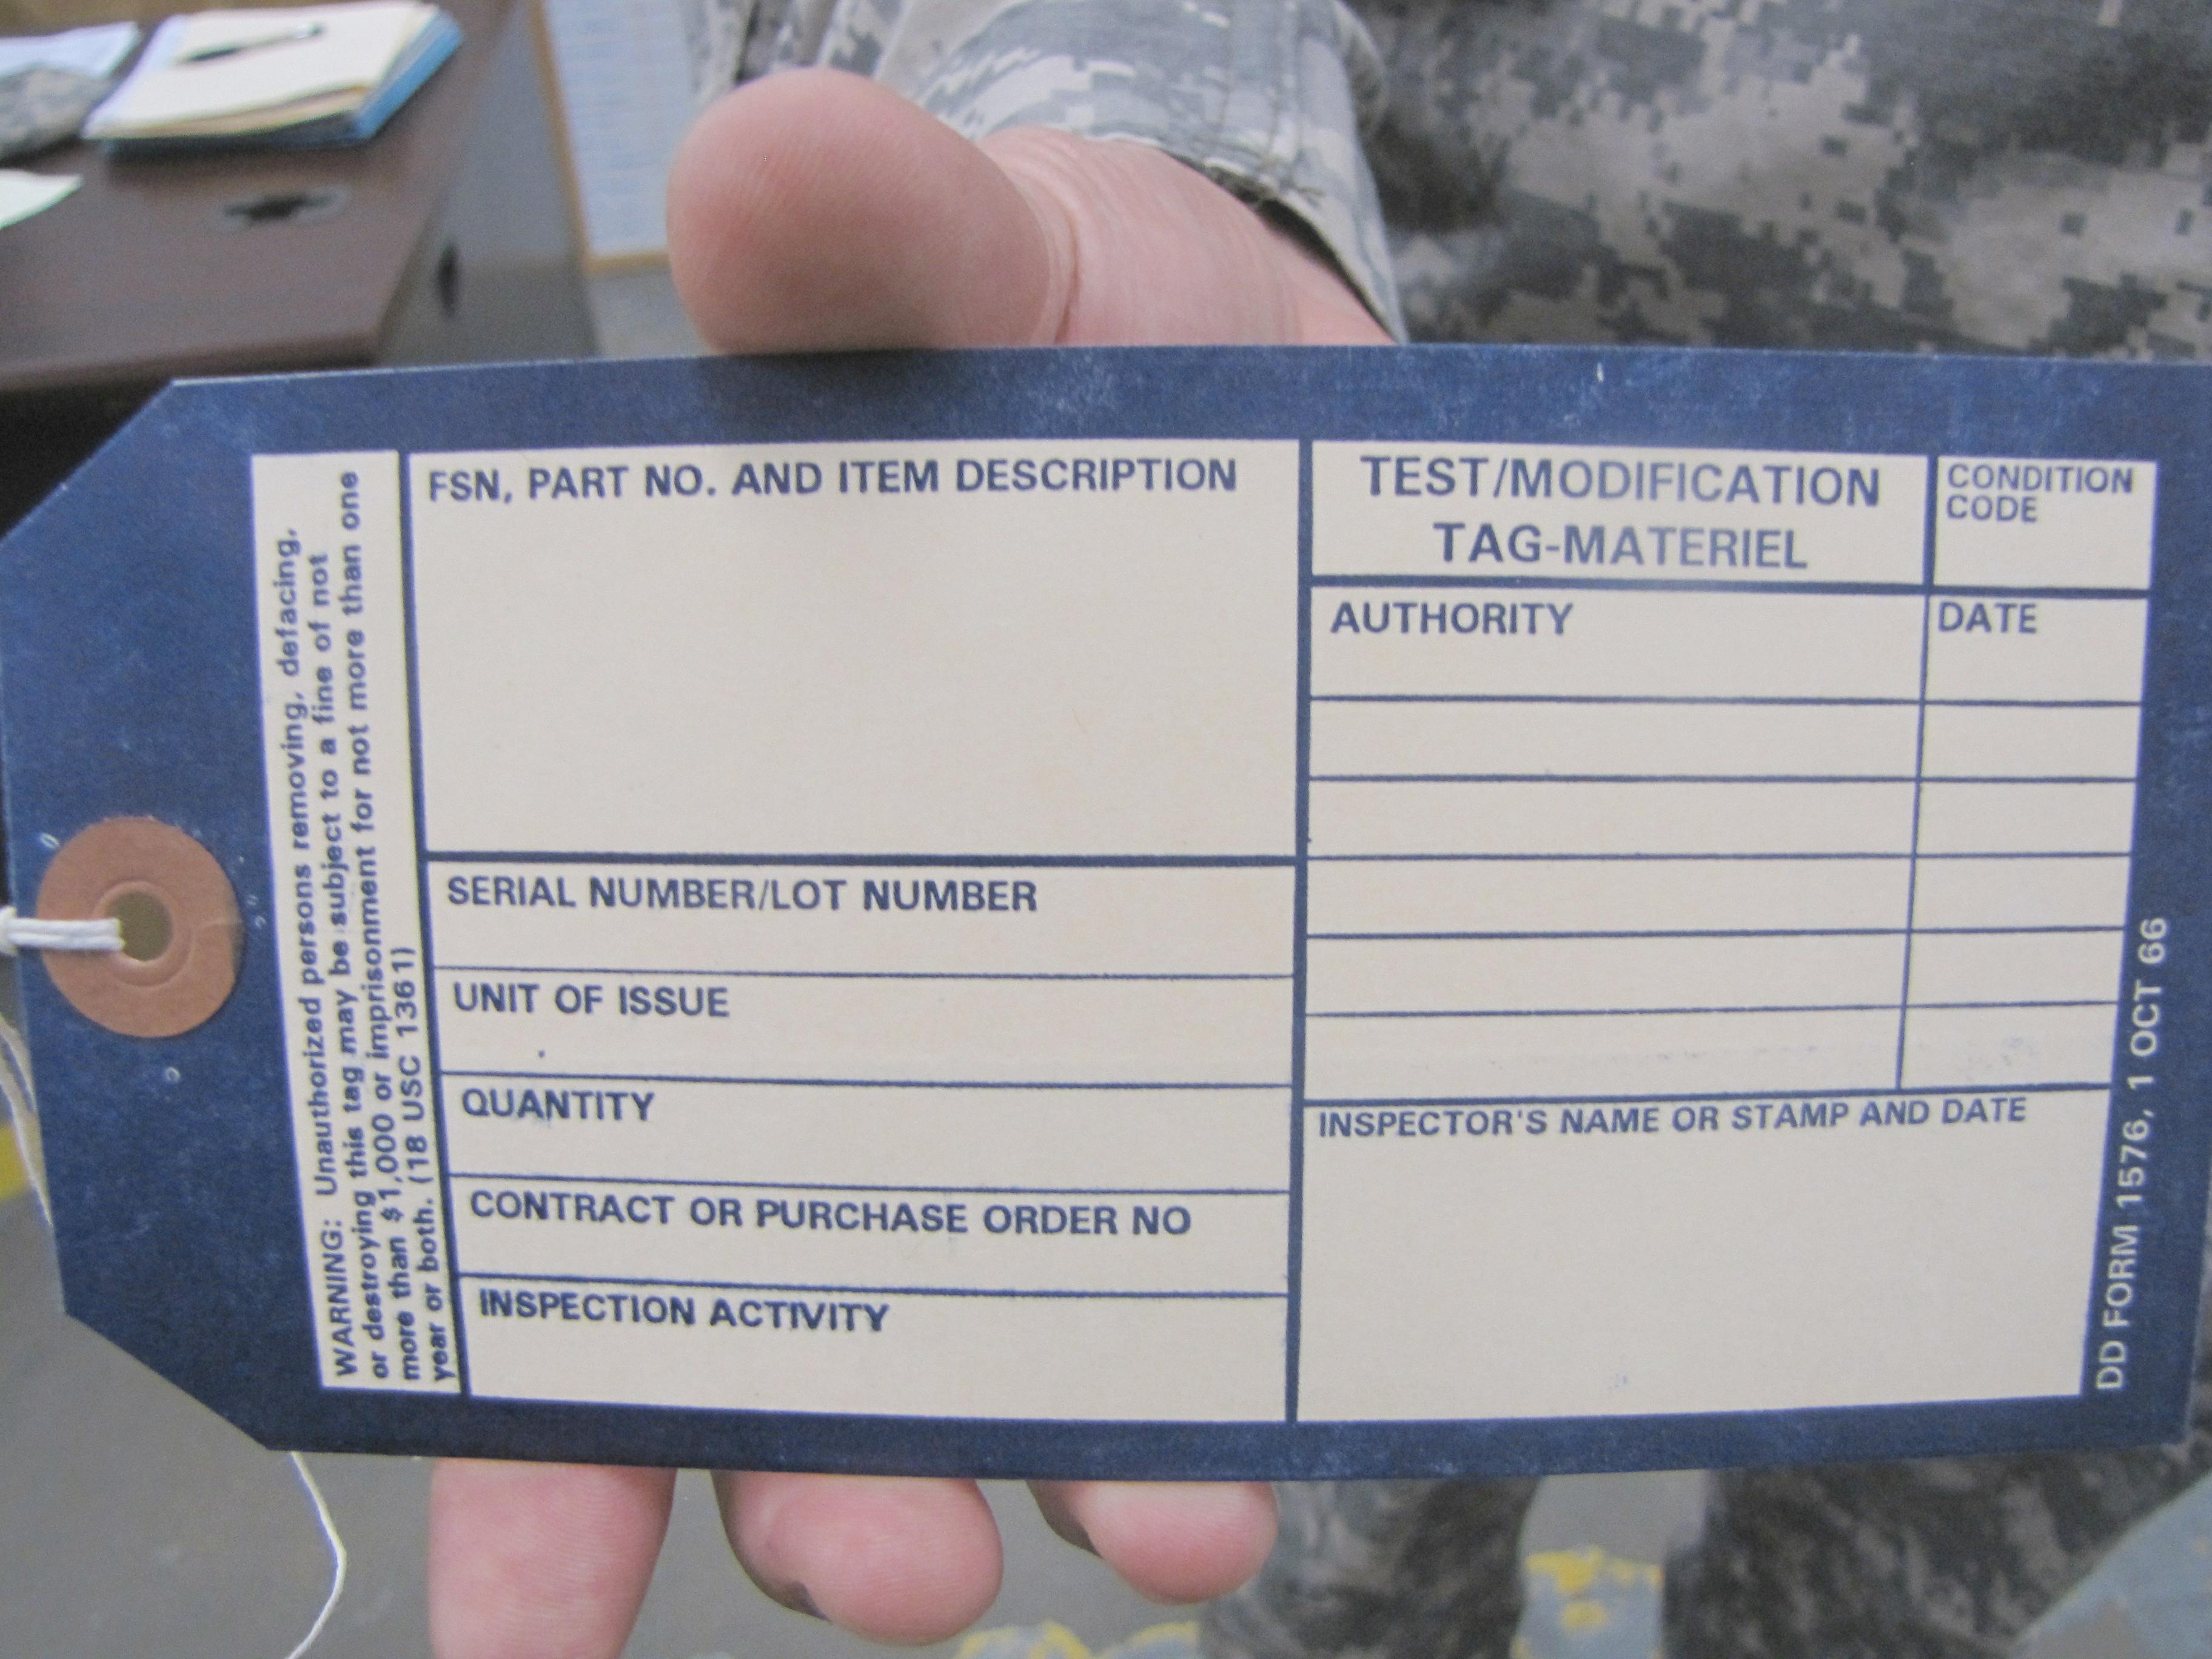 Aviation Need Condition Code Tags Ps Magazine Informing Army Readiness Tb 43 Ps Series Articles